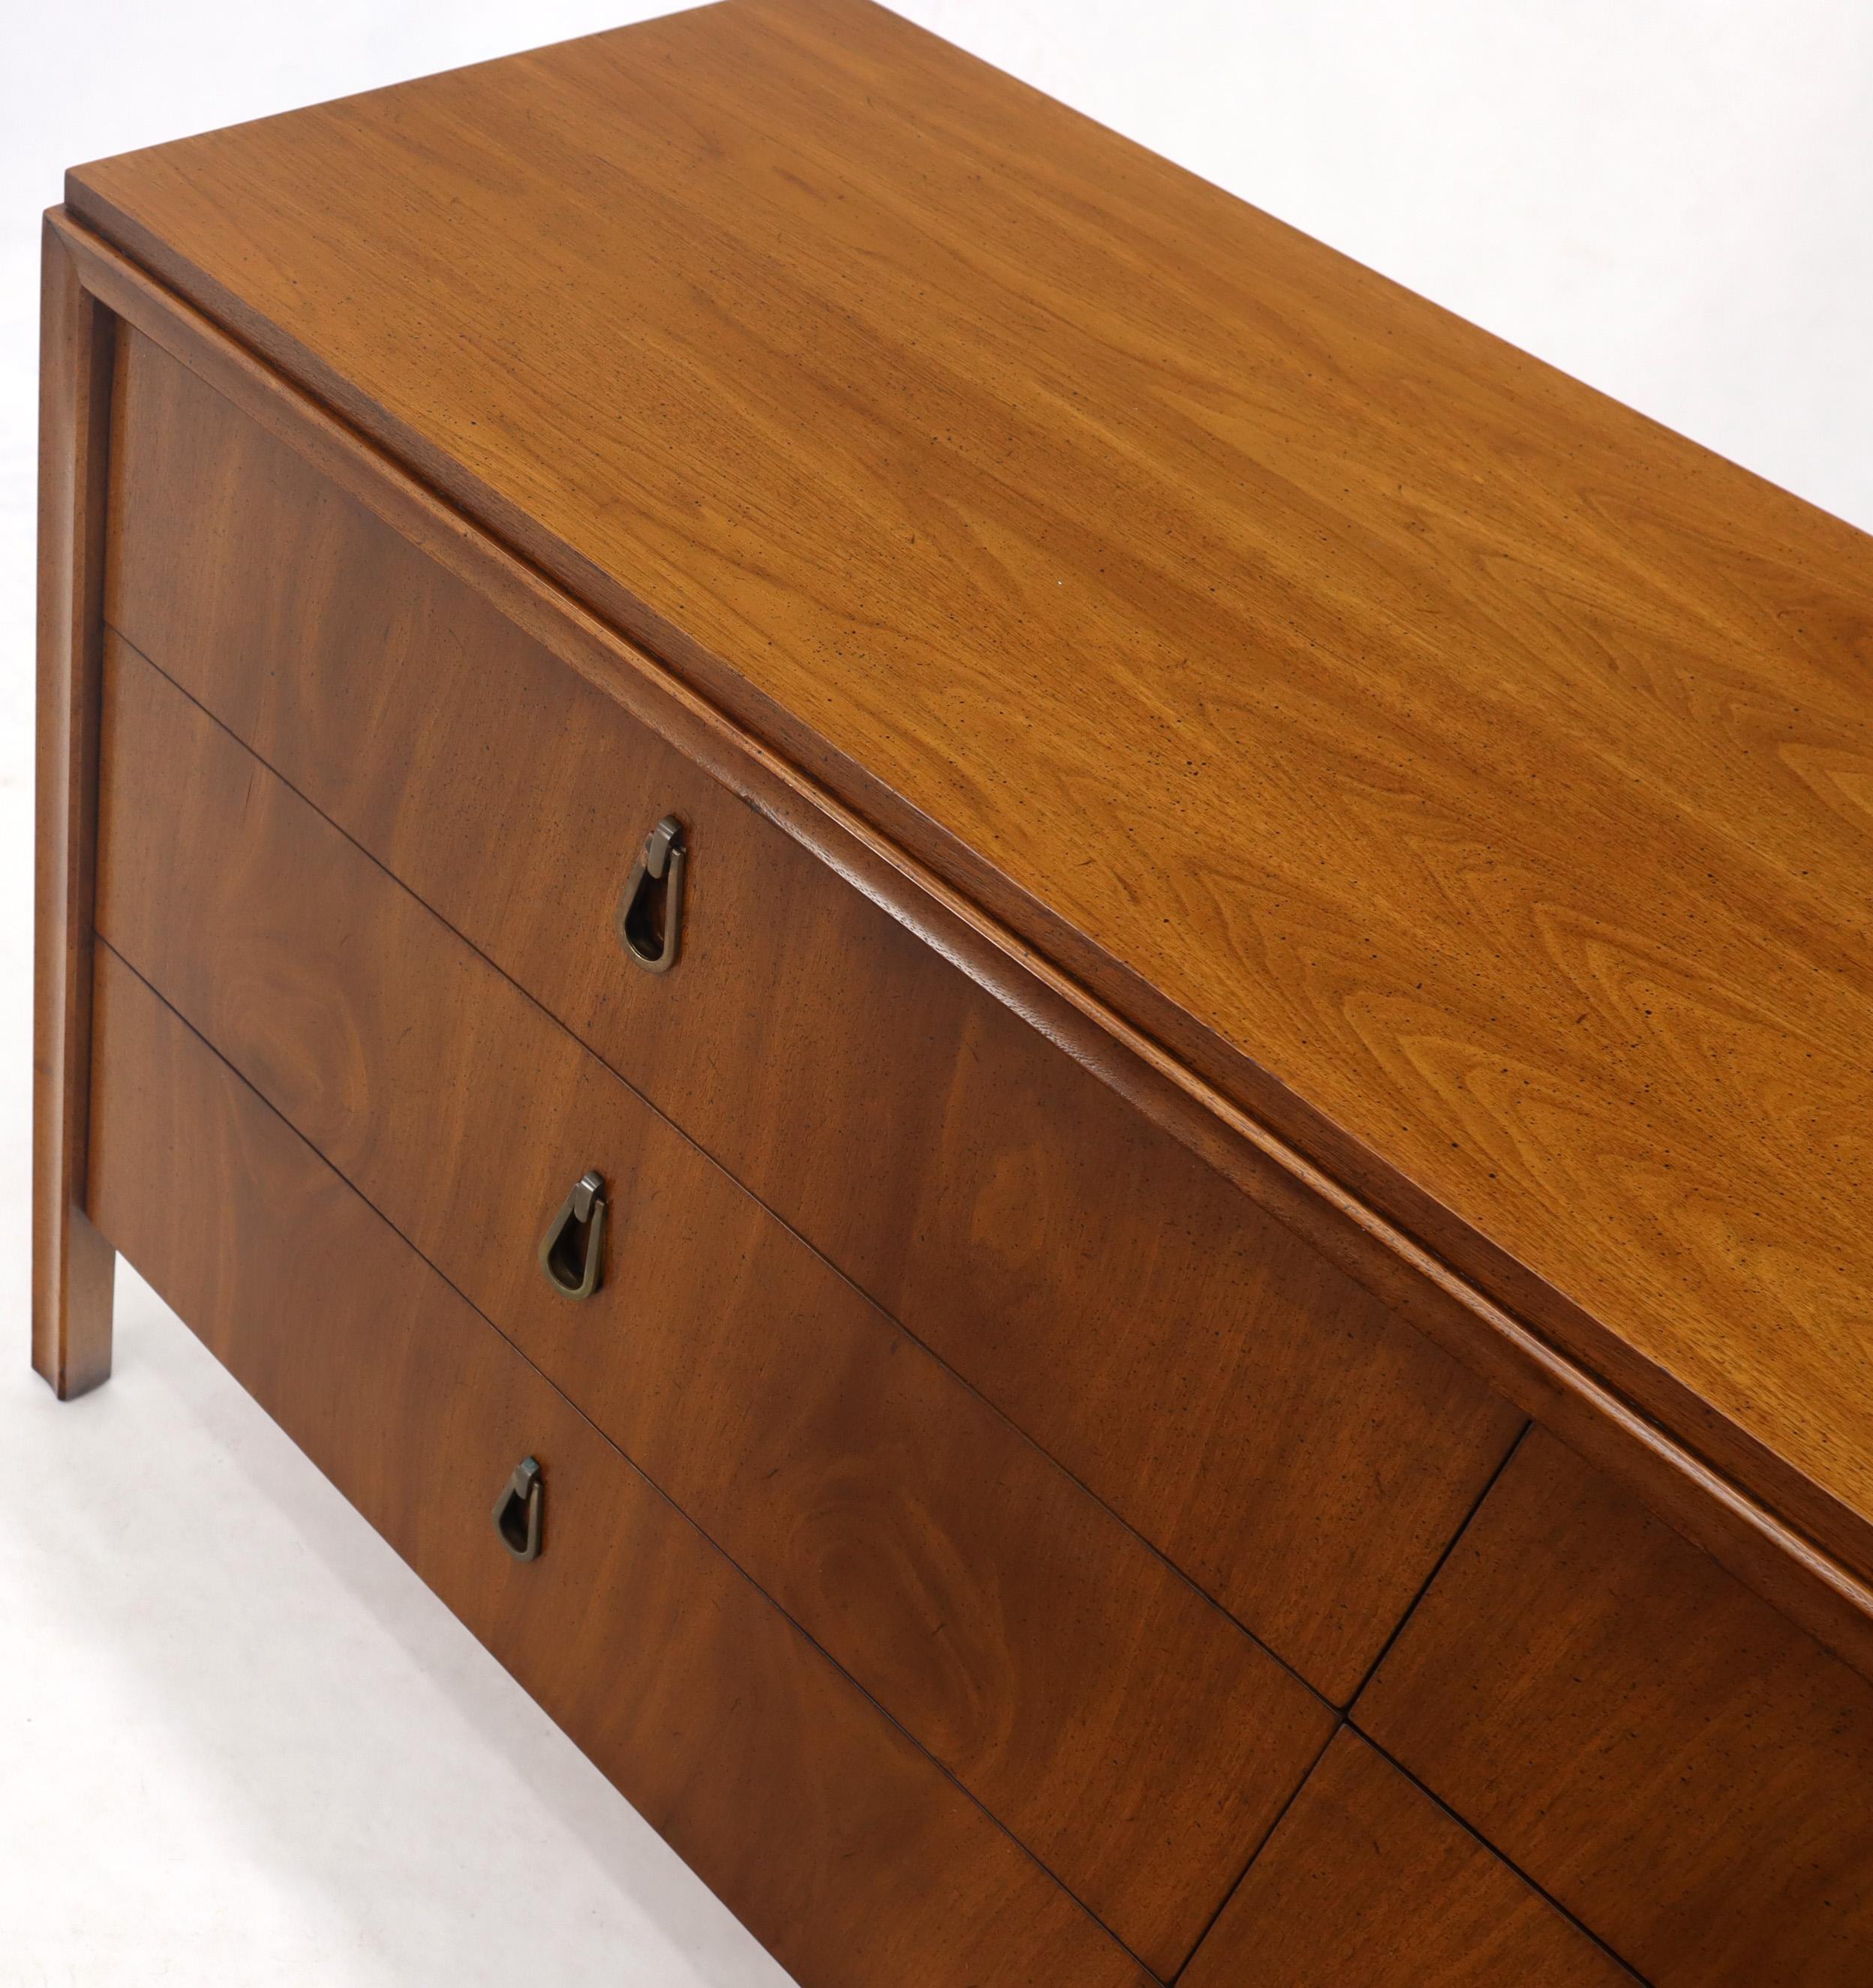 Lacquered Mid-Century Modern Walnut Double Dresser with Tear Drop Pulls